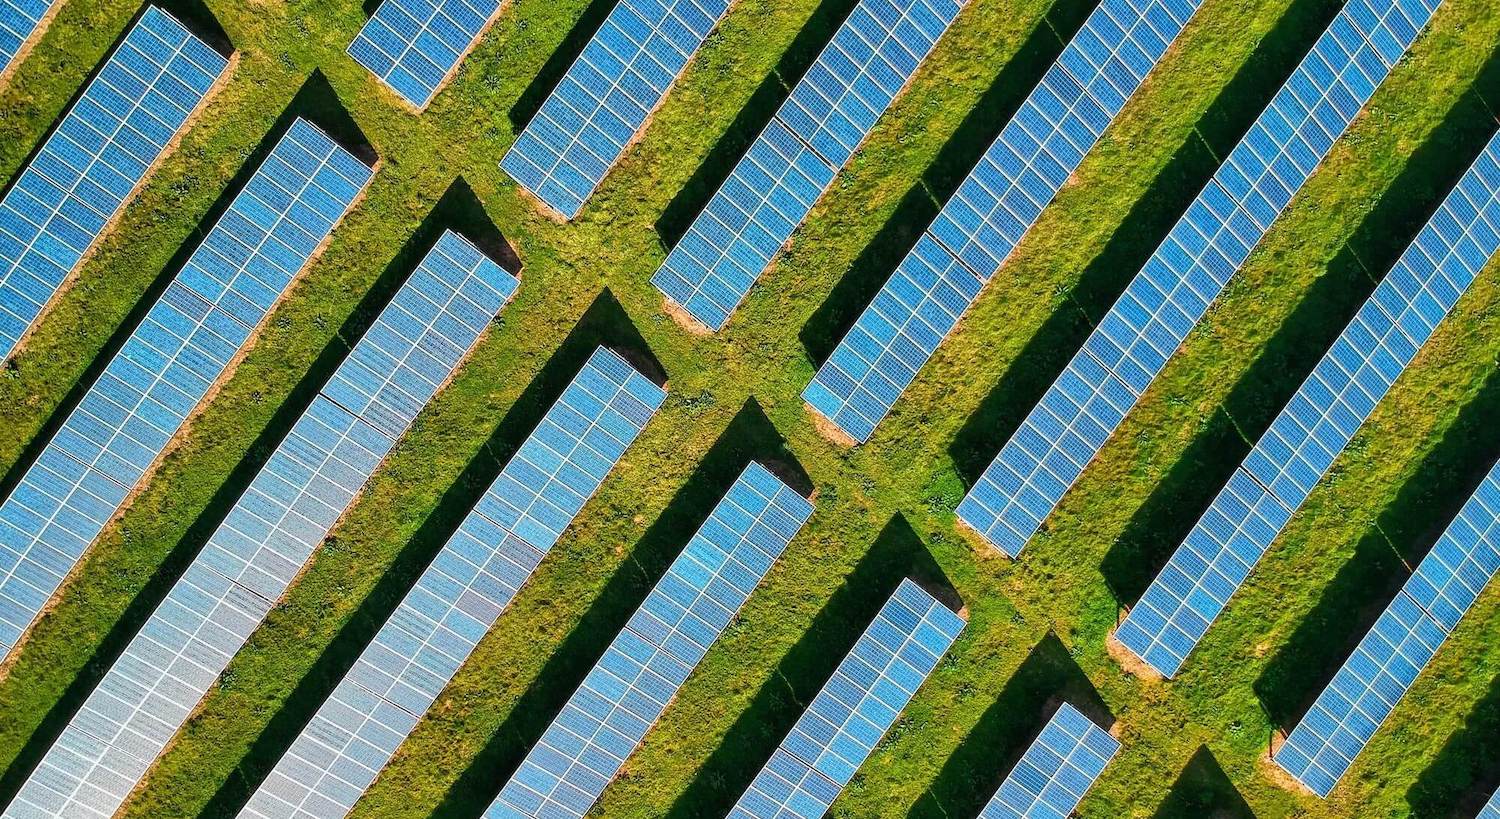 Harnessing the power of the sun – what are the beneﬁts of solar power farms? And an opportunity to have one in your area, on your property!